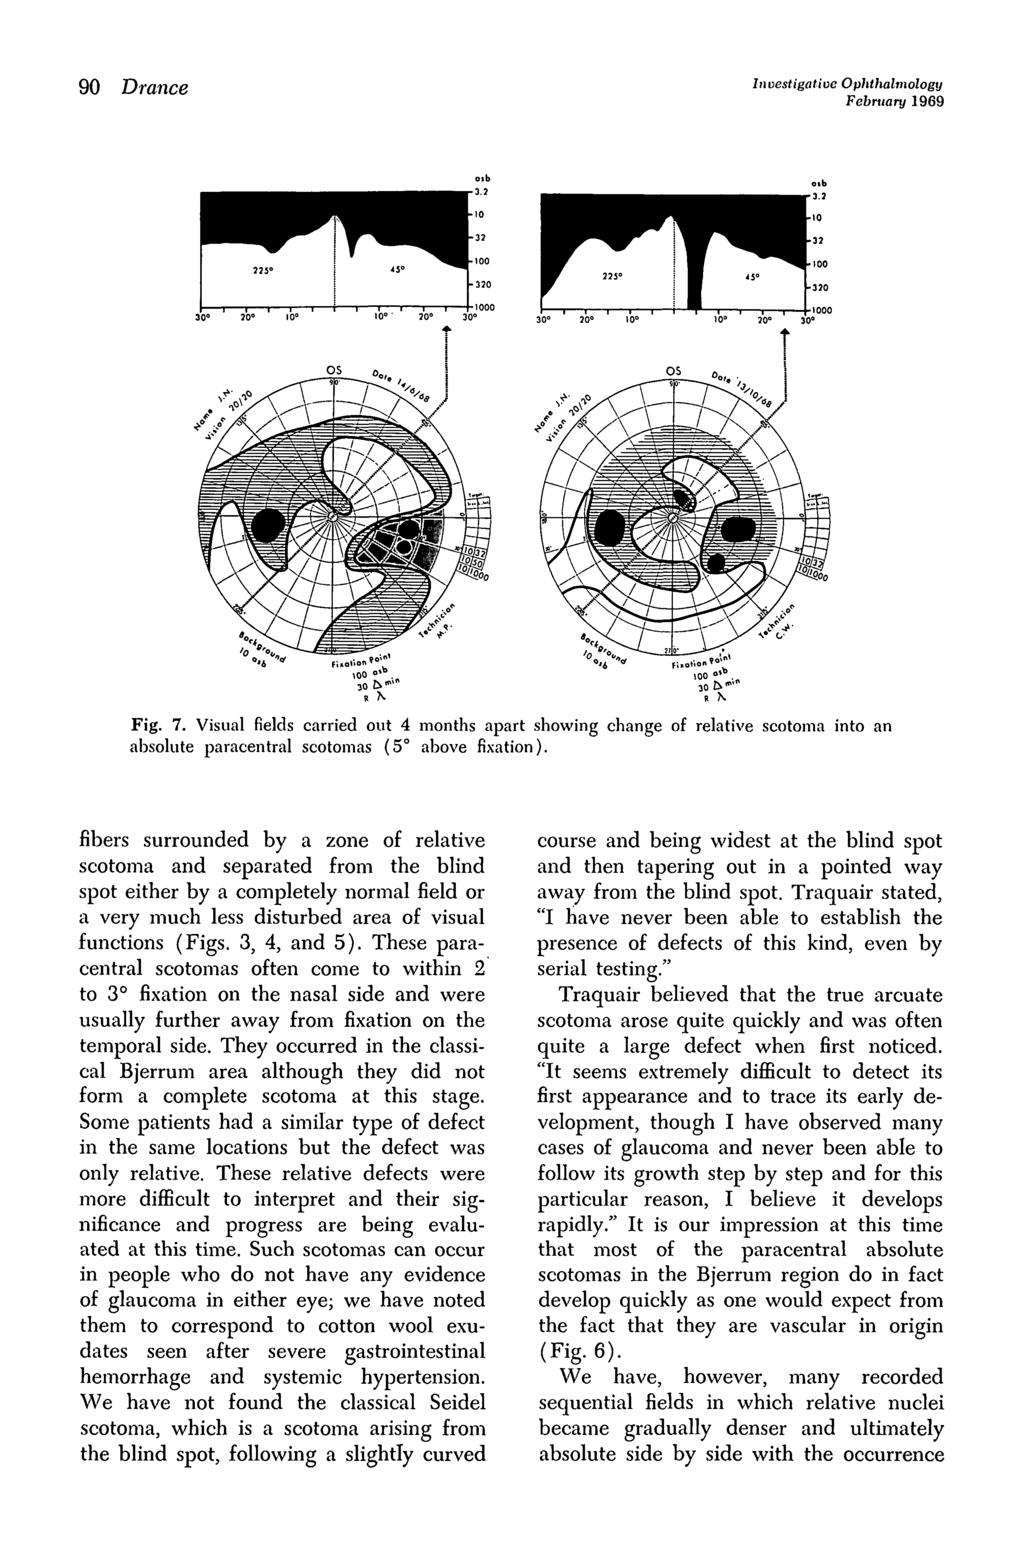 90 Drance Investigative Ophthalmology February 1969 Fig. 7. Visual fields carried out 4 months apart showing change of relative scotoma into an absolute paracentral scotomas (5 above fixation).